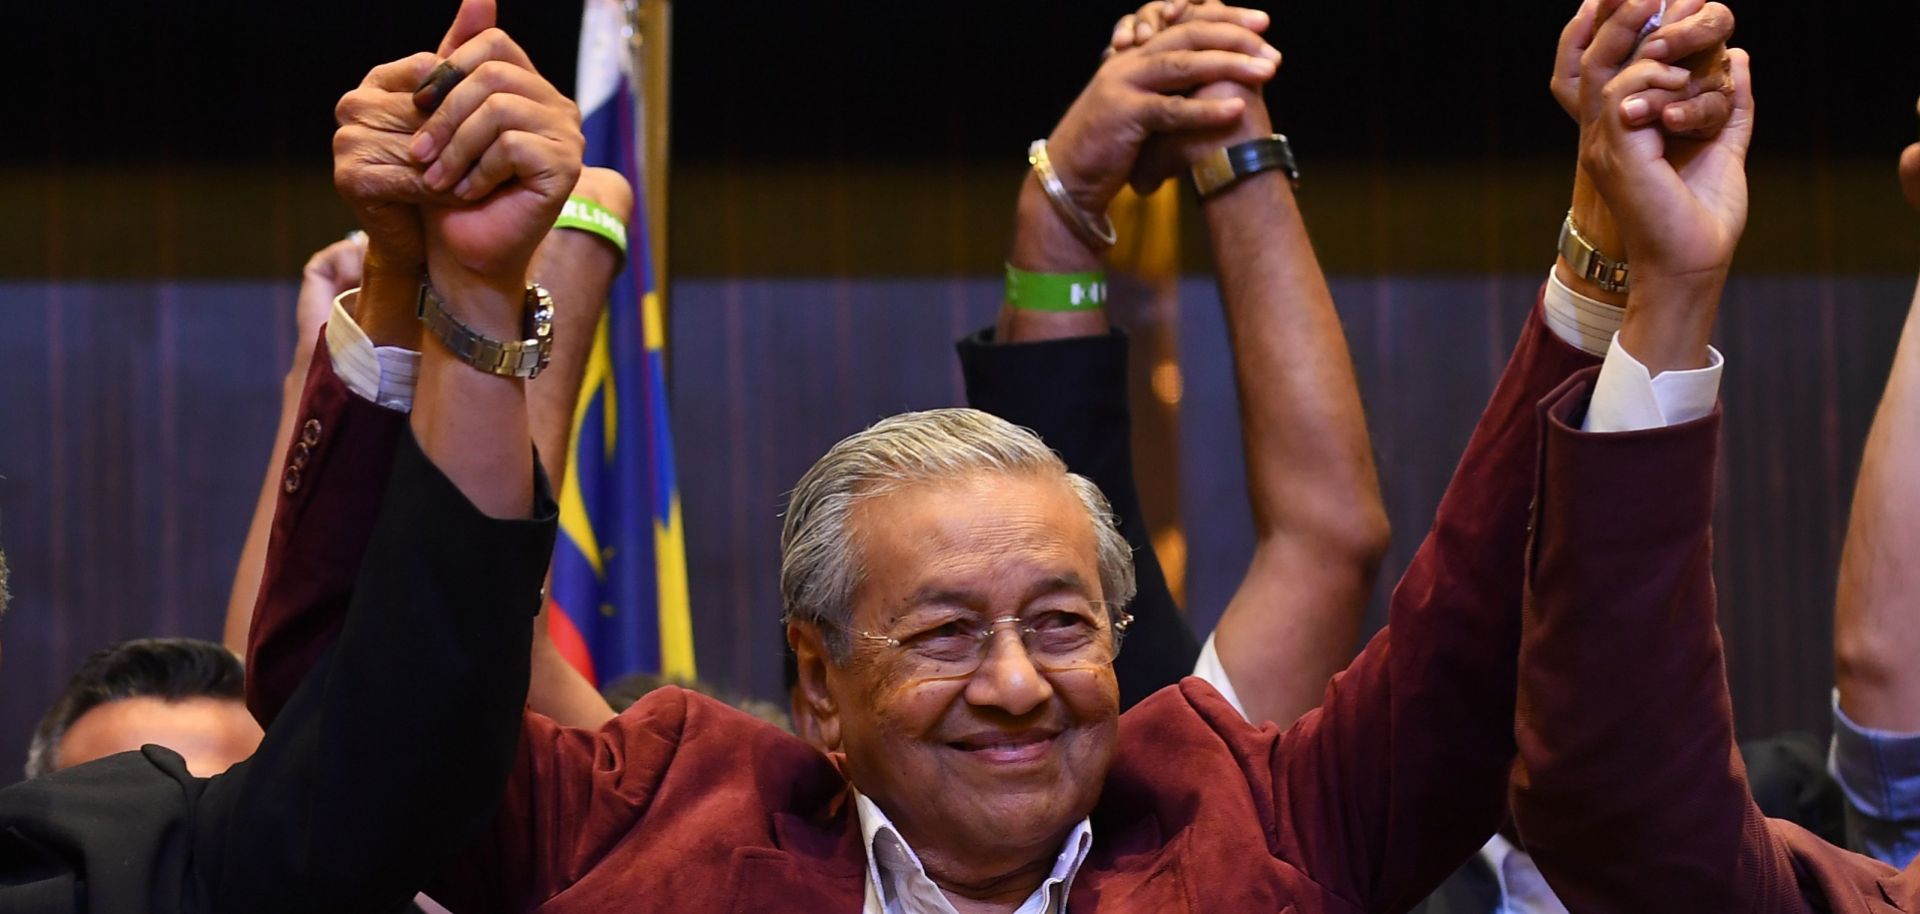 Mahathir Mohamad, who served as Malaysia's prime minister from 1981-2003, celebrates his victory and return to power in the country's election in May 2018.